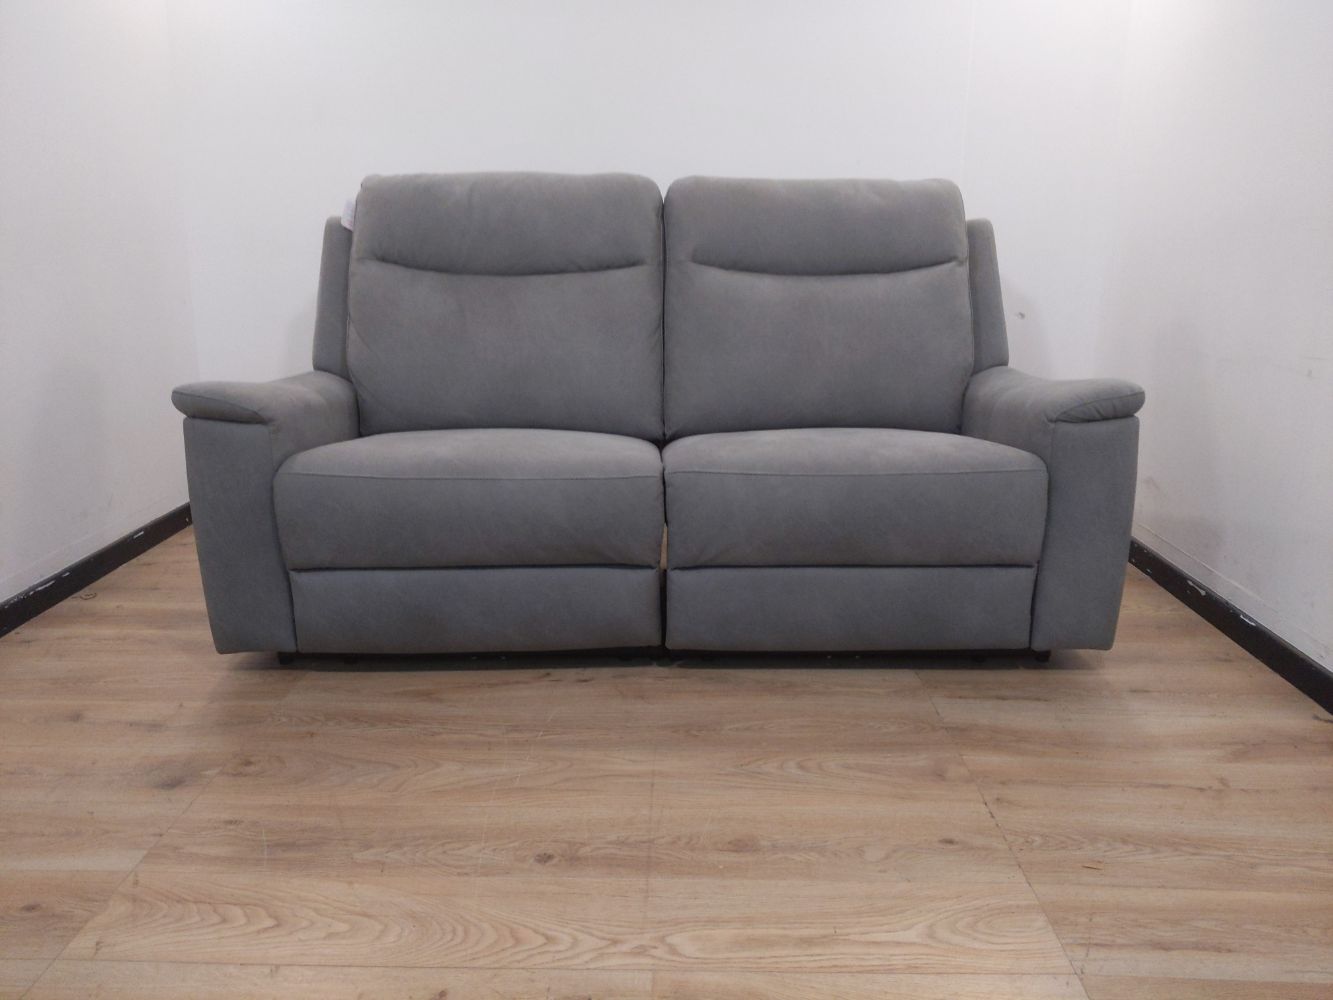 Sofas and Chairs from SCS, DFS and more at up to 90% off RRP with reduced Buyers premium